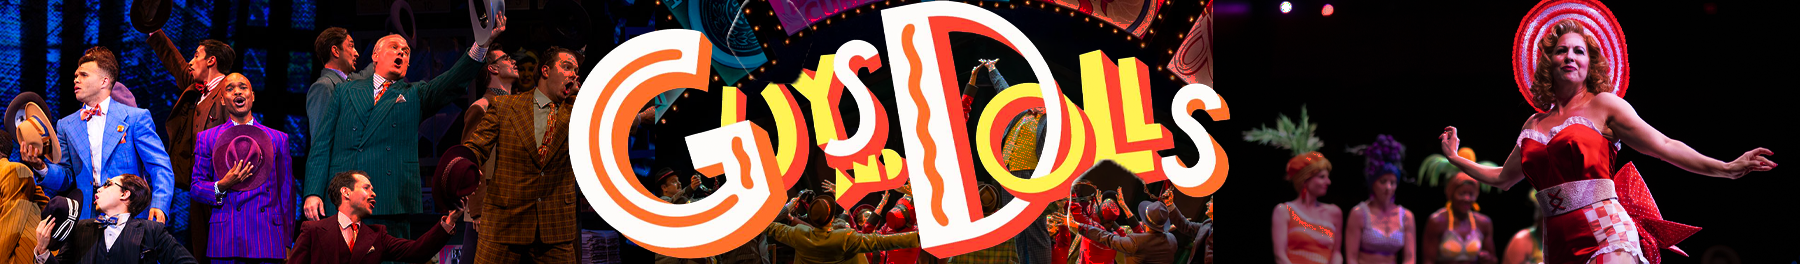 Guys And Dolls Broadway Show